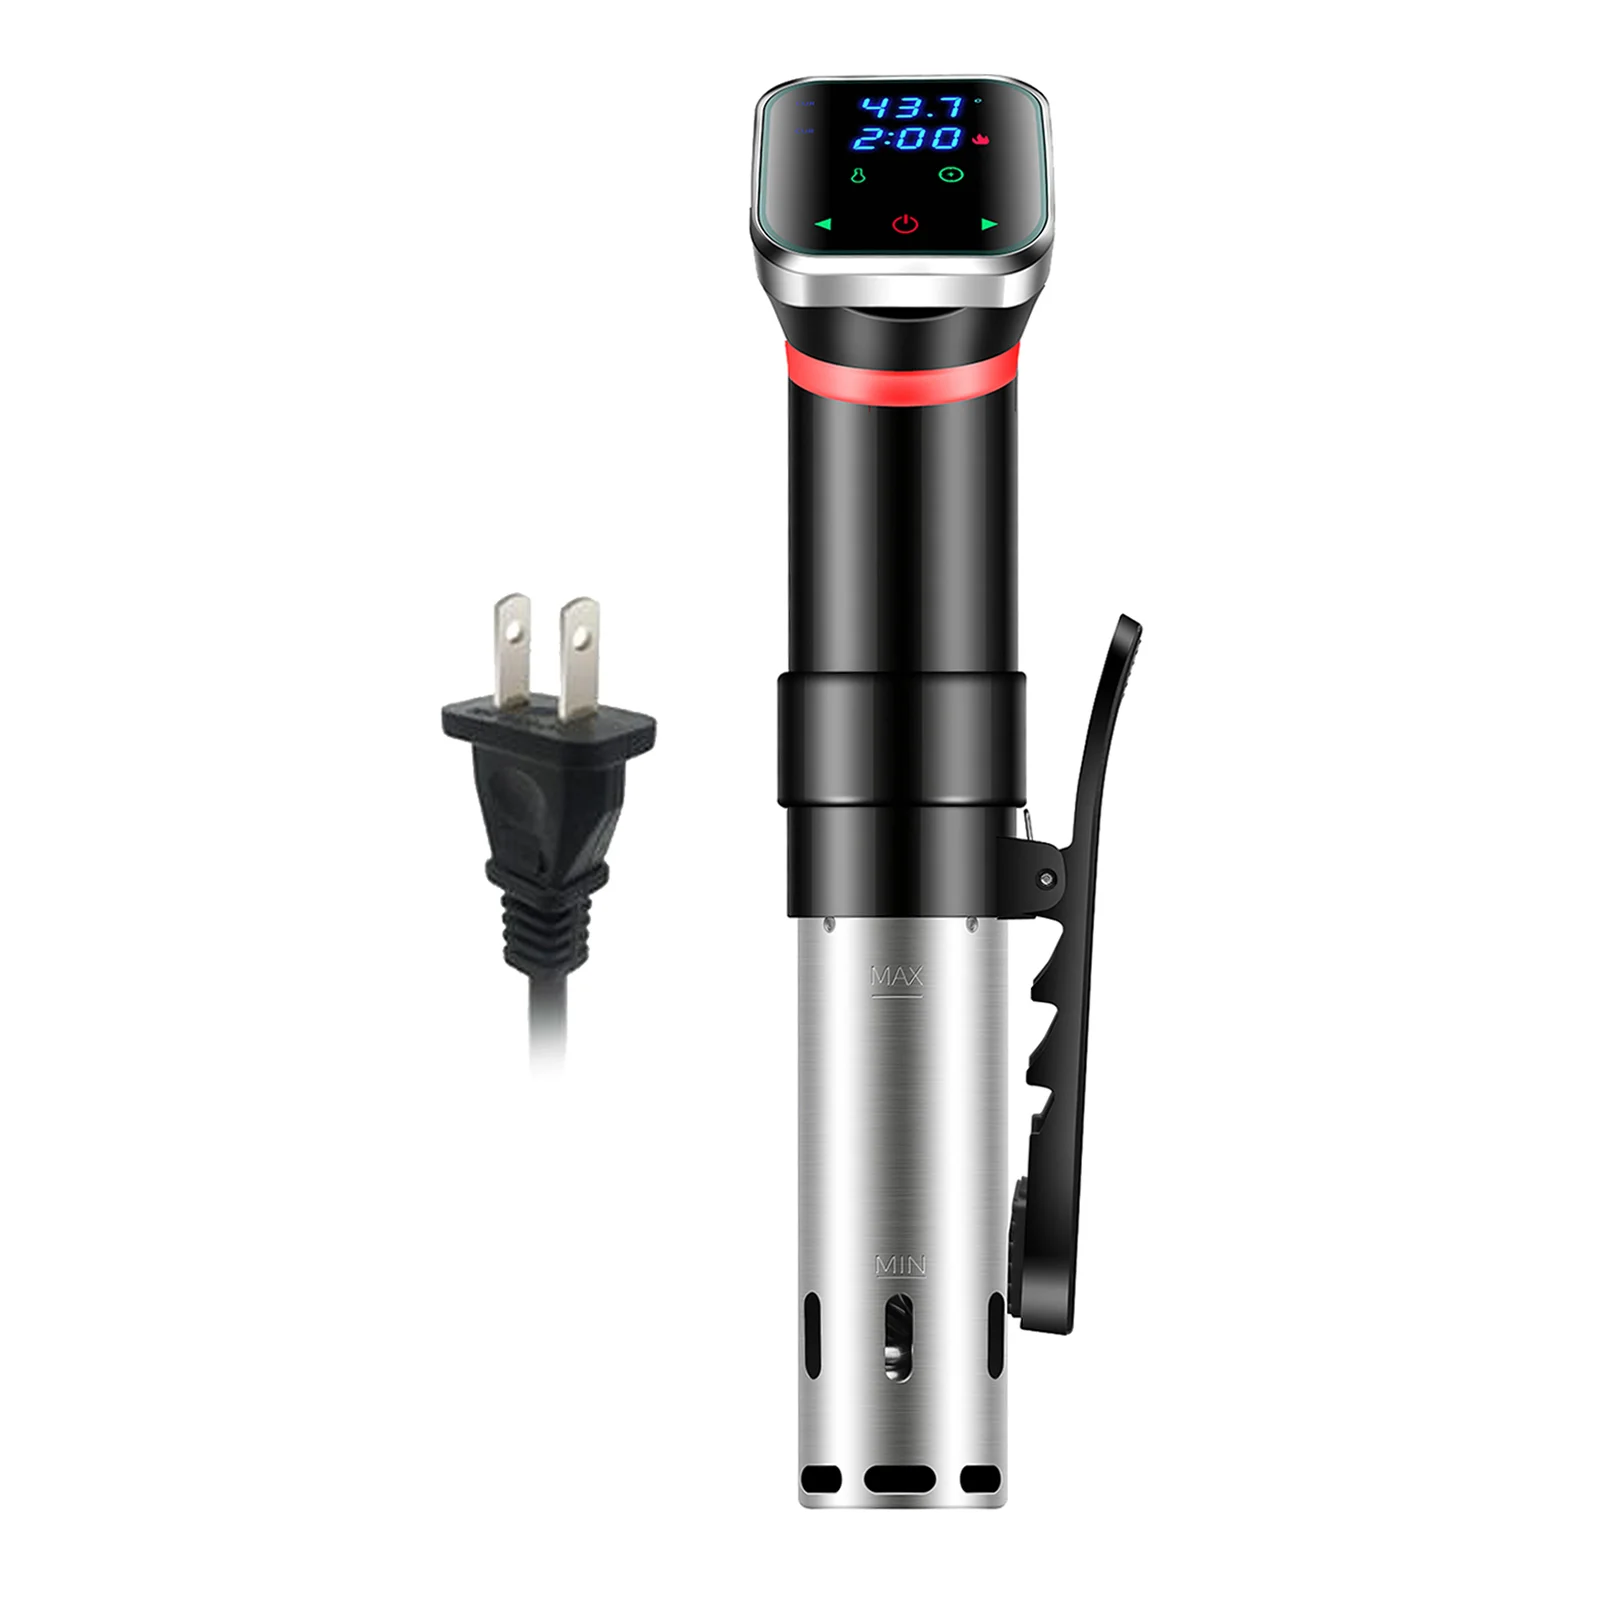 Portable 1100W Vacuum Food Sous Vide Machine Precision Cooker Cooking Device Sturdy Immersion Circulator Digital Timer, US Plug